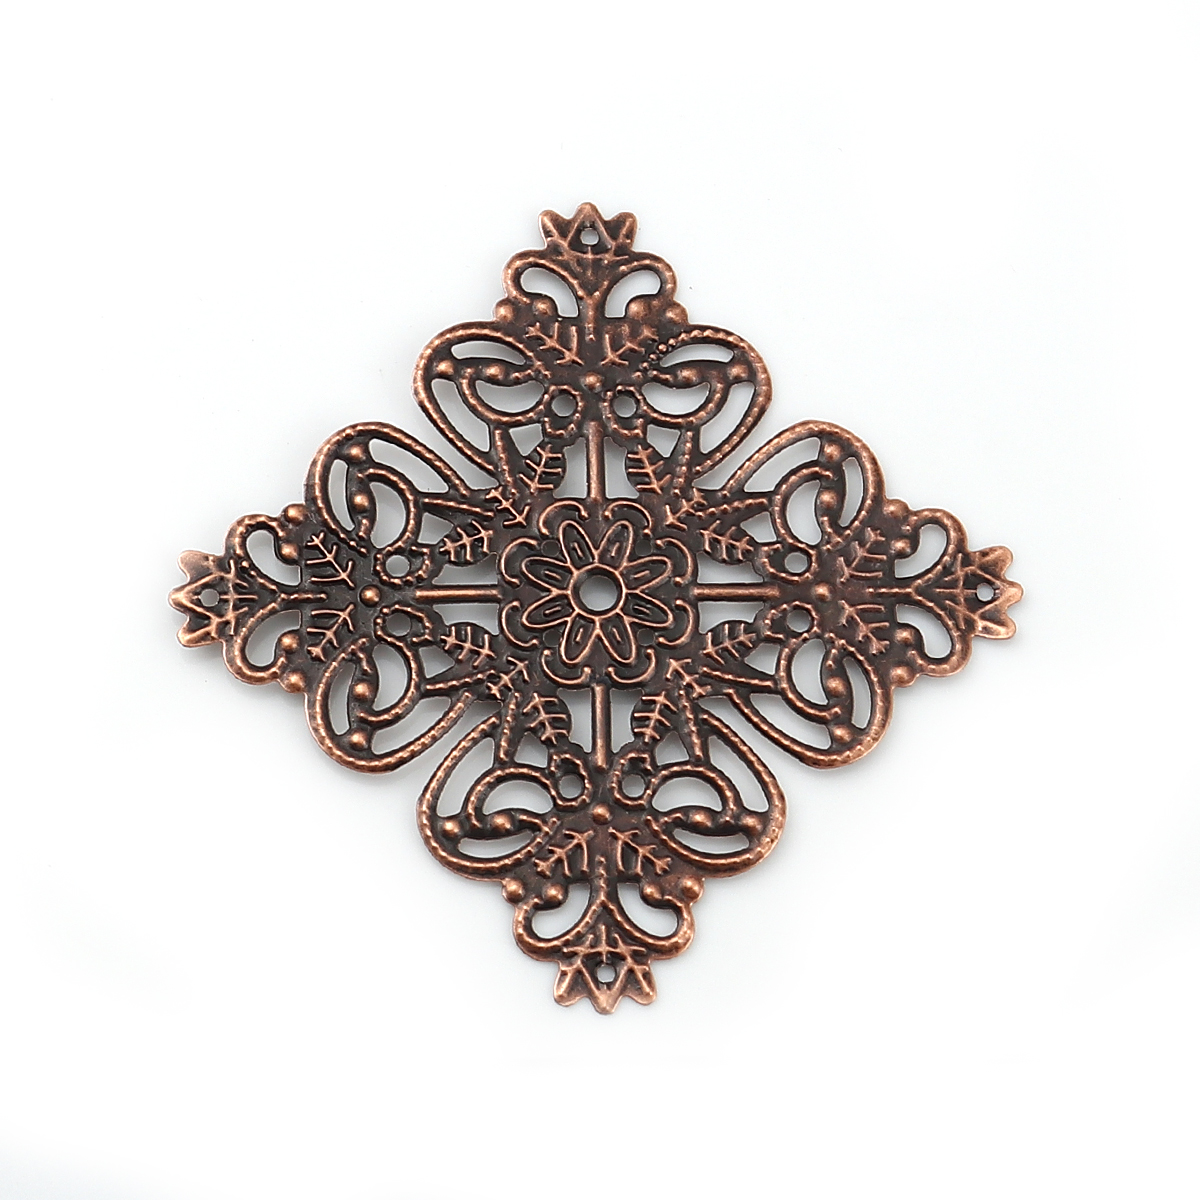 Picture of Iron Based Alloy Filigree Stamping Embellishments Square Antique Copper 56mm(2 2/8") x 56mm(2 2/8"), 30 PCs